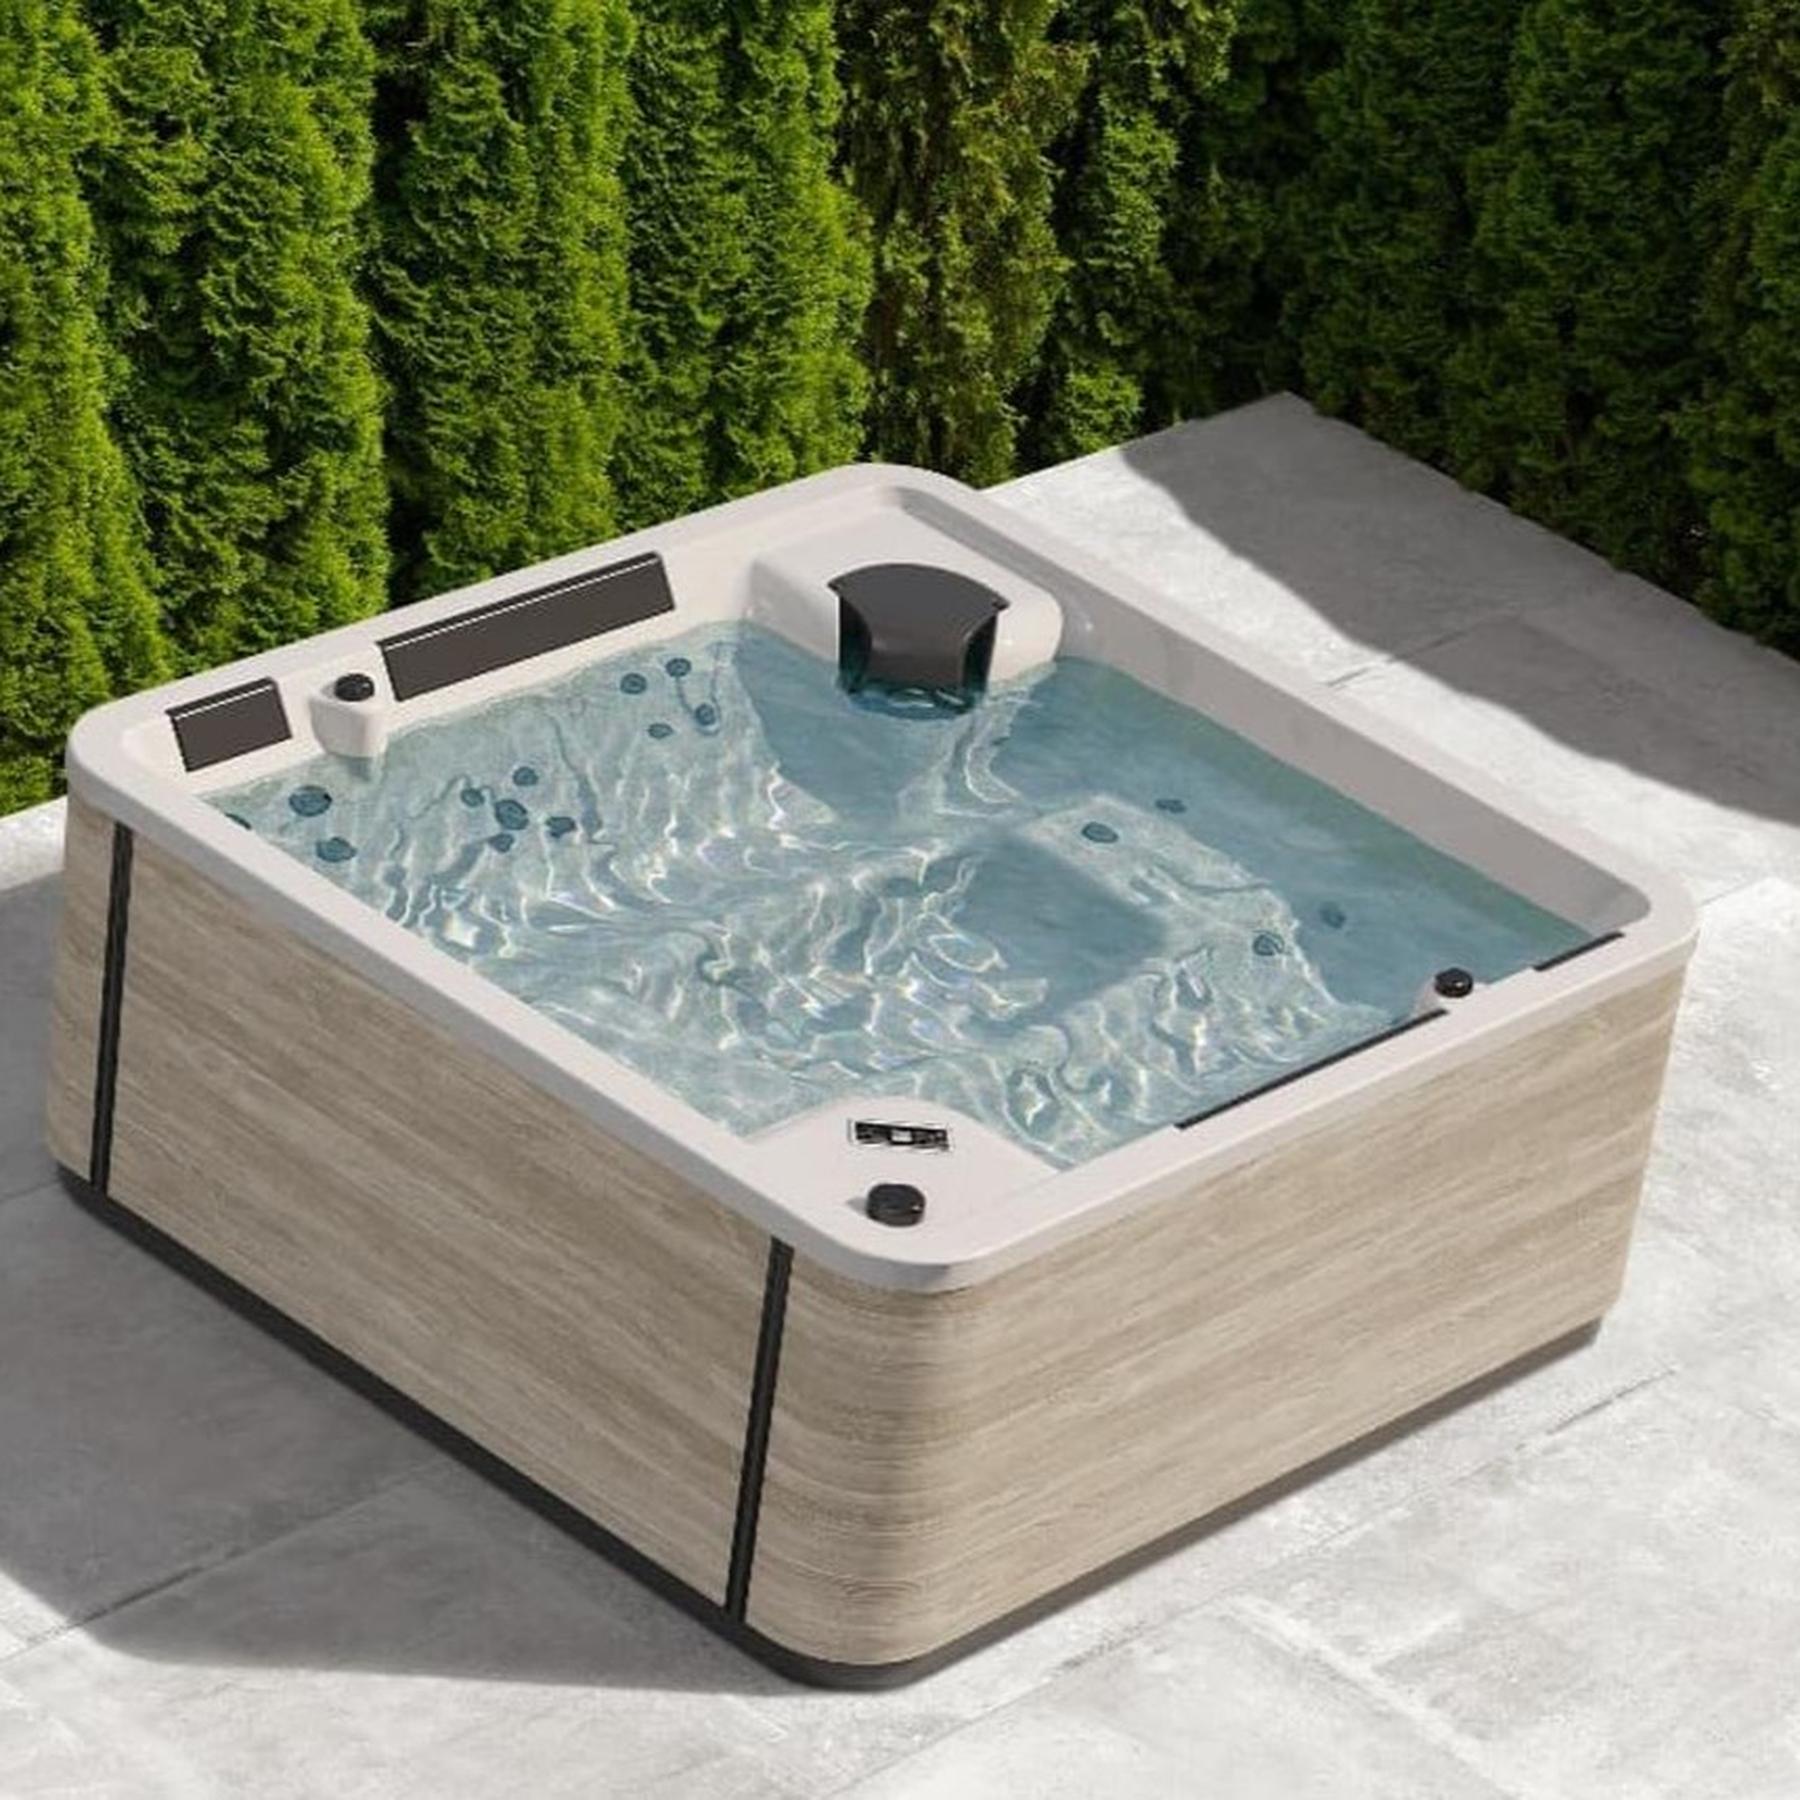 Spa Kinedo A600 6 Places Gris Relax Airturbo Tablier Inclus